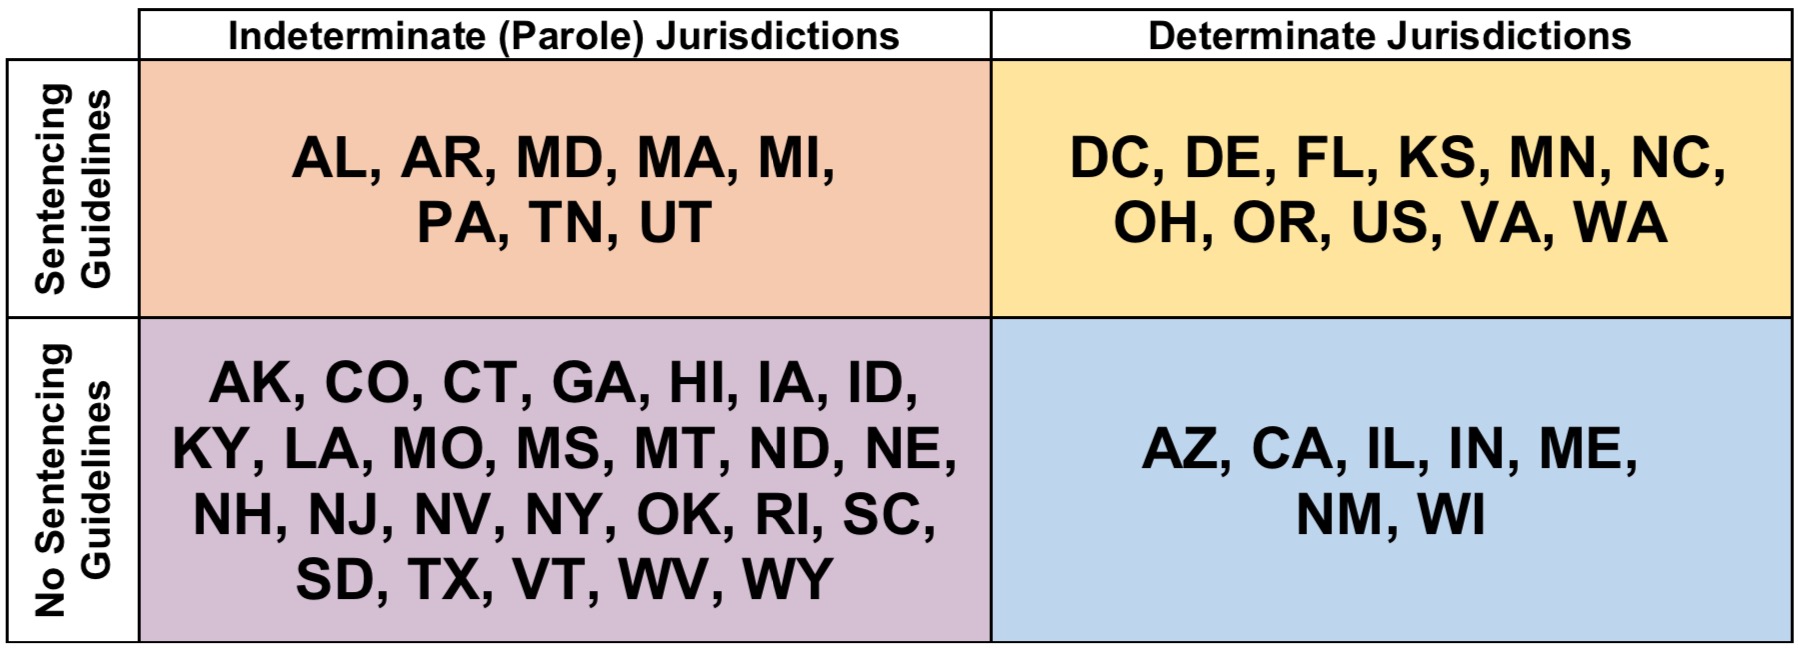 Table 1. Sentencing Guidelines and Parole in U.S. Jurisdictions